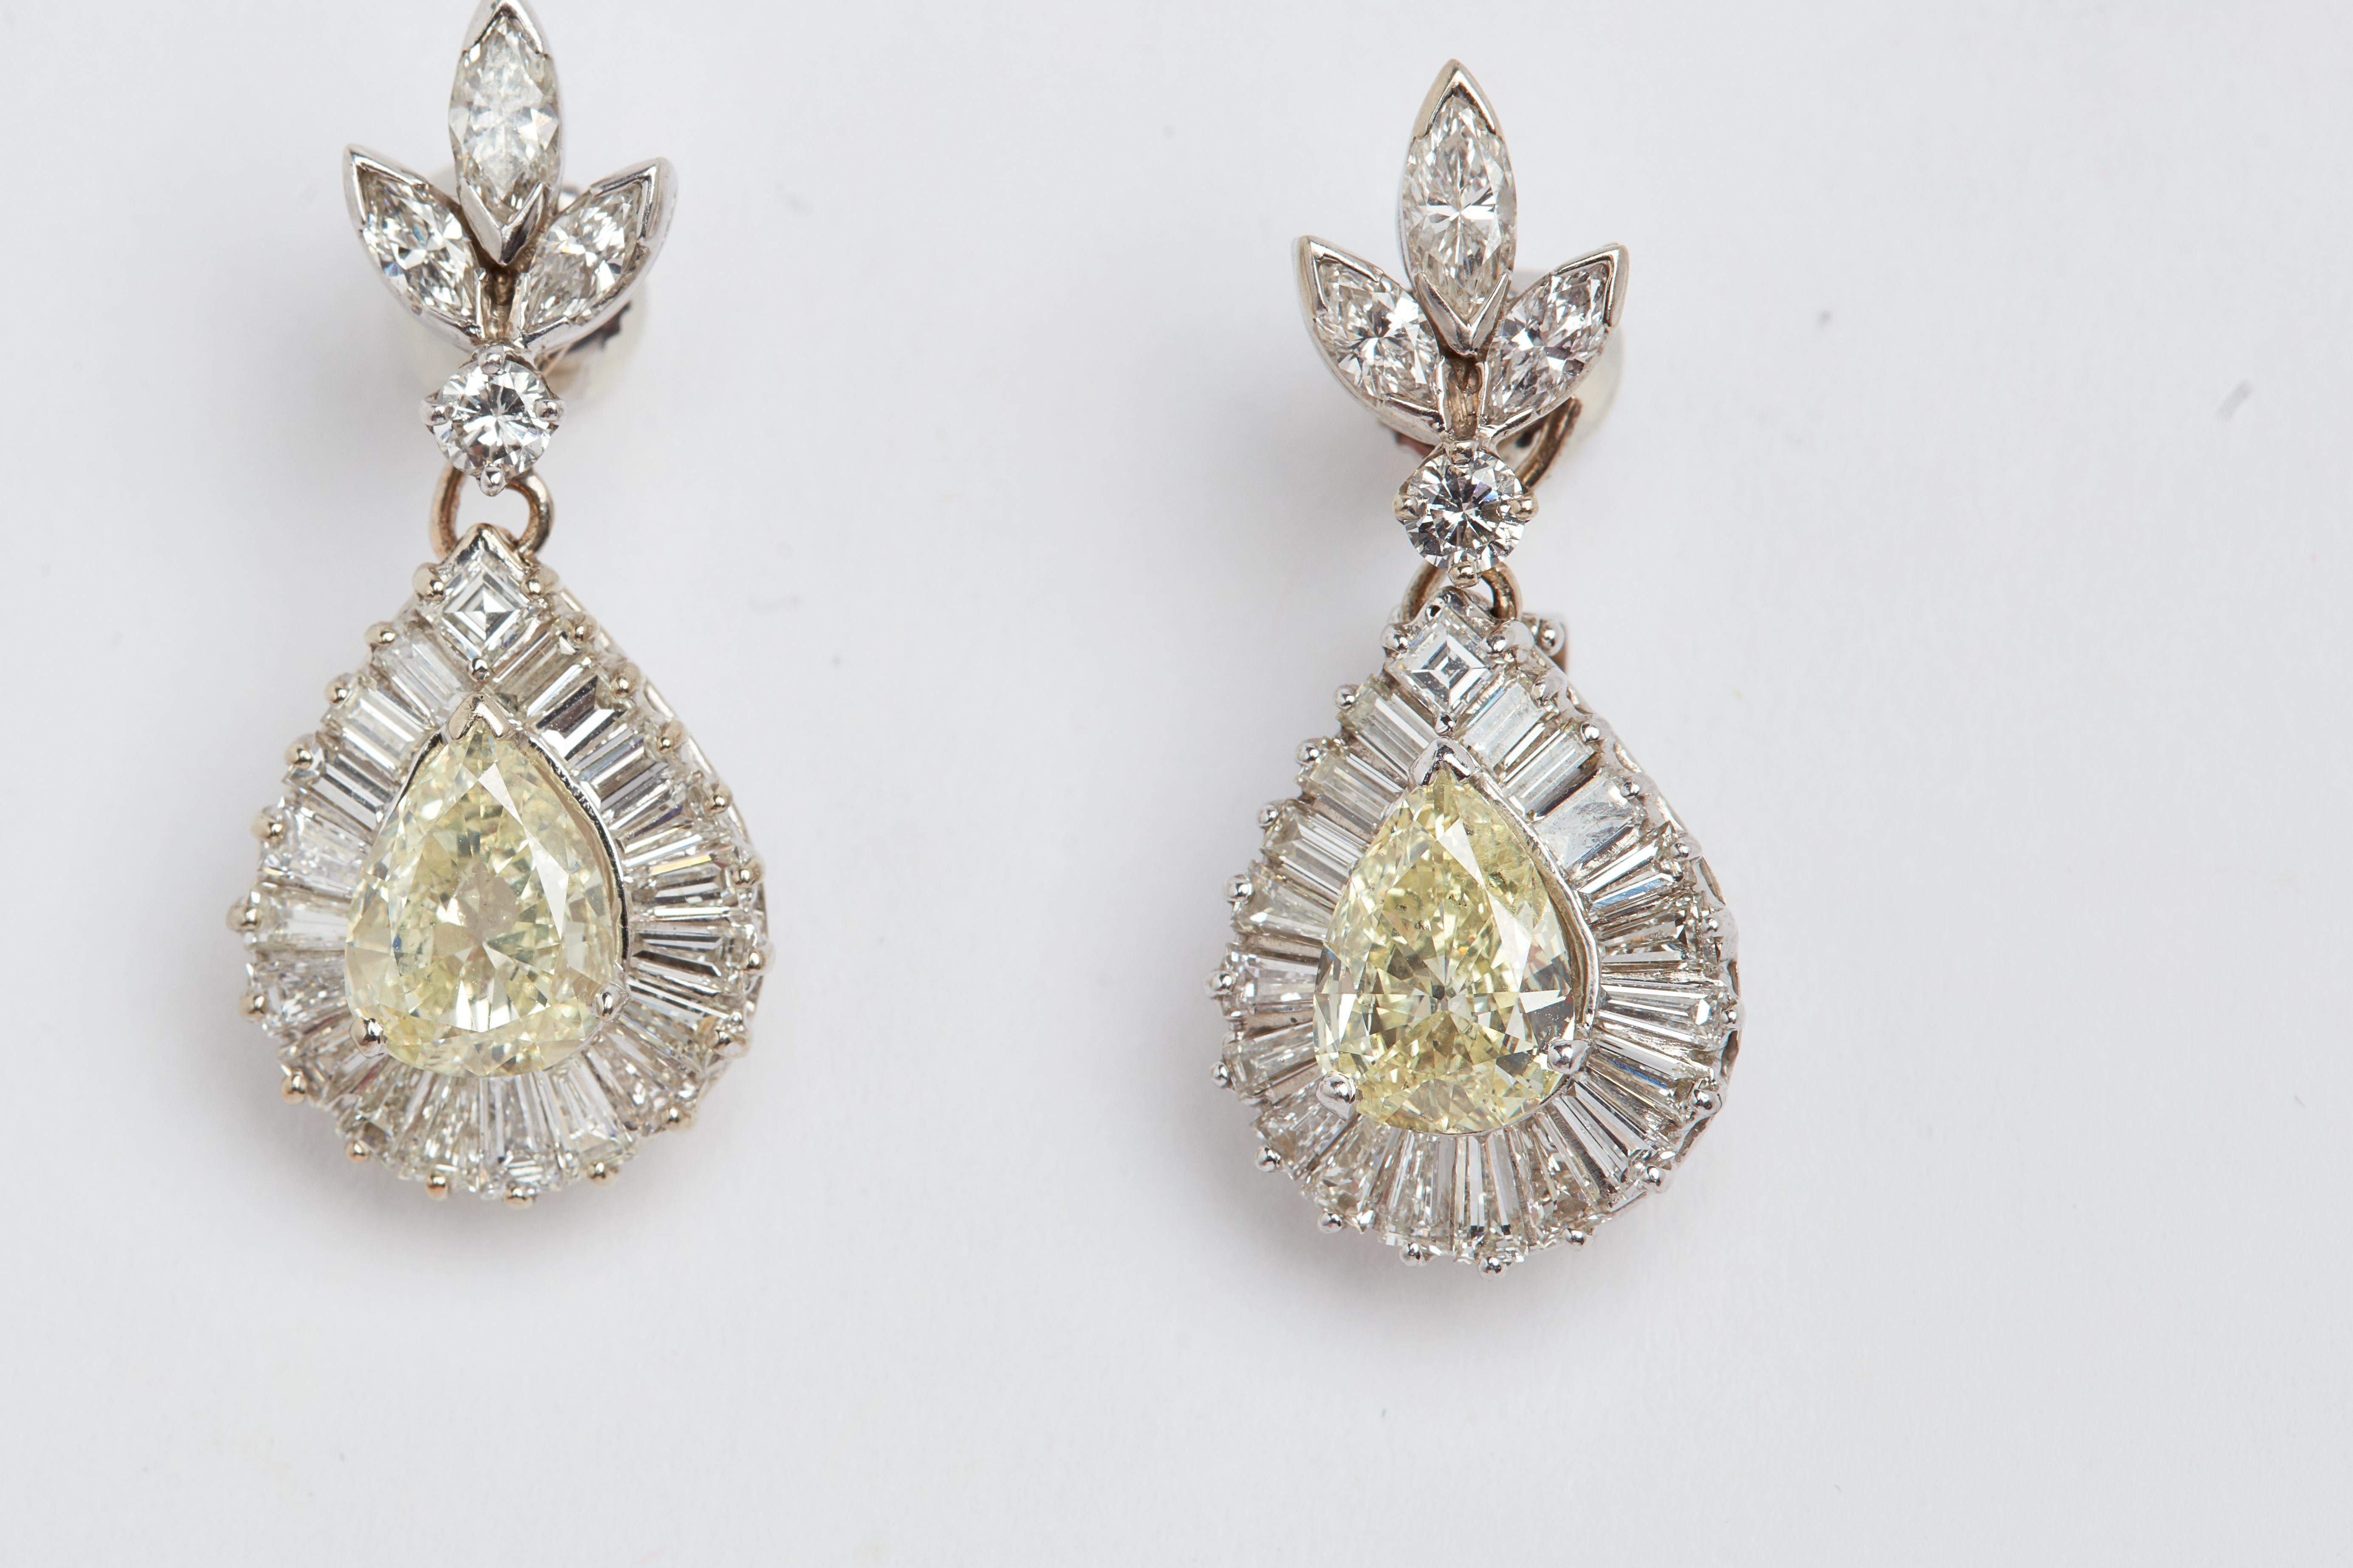 Natural Fancy Yellow and White Diamond Earrings with 18 Karat White Gold 2